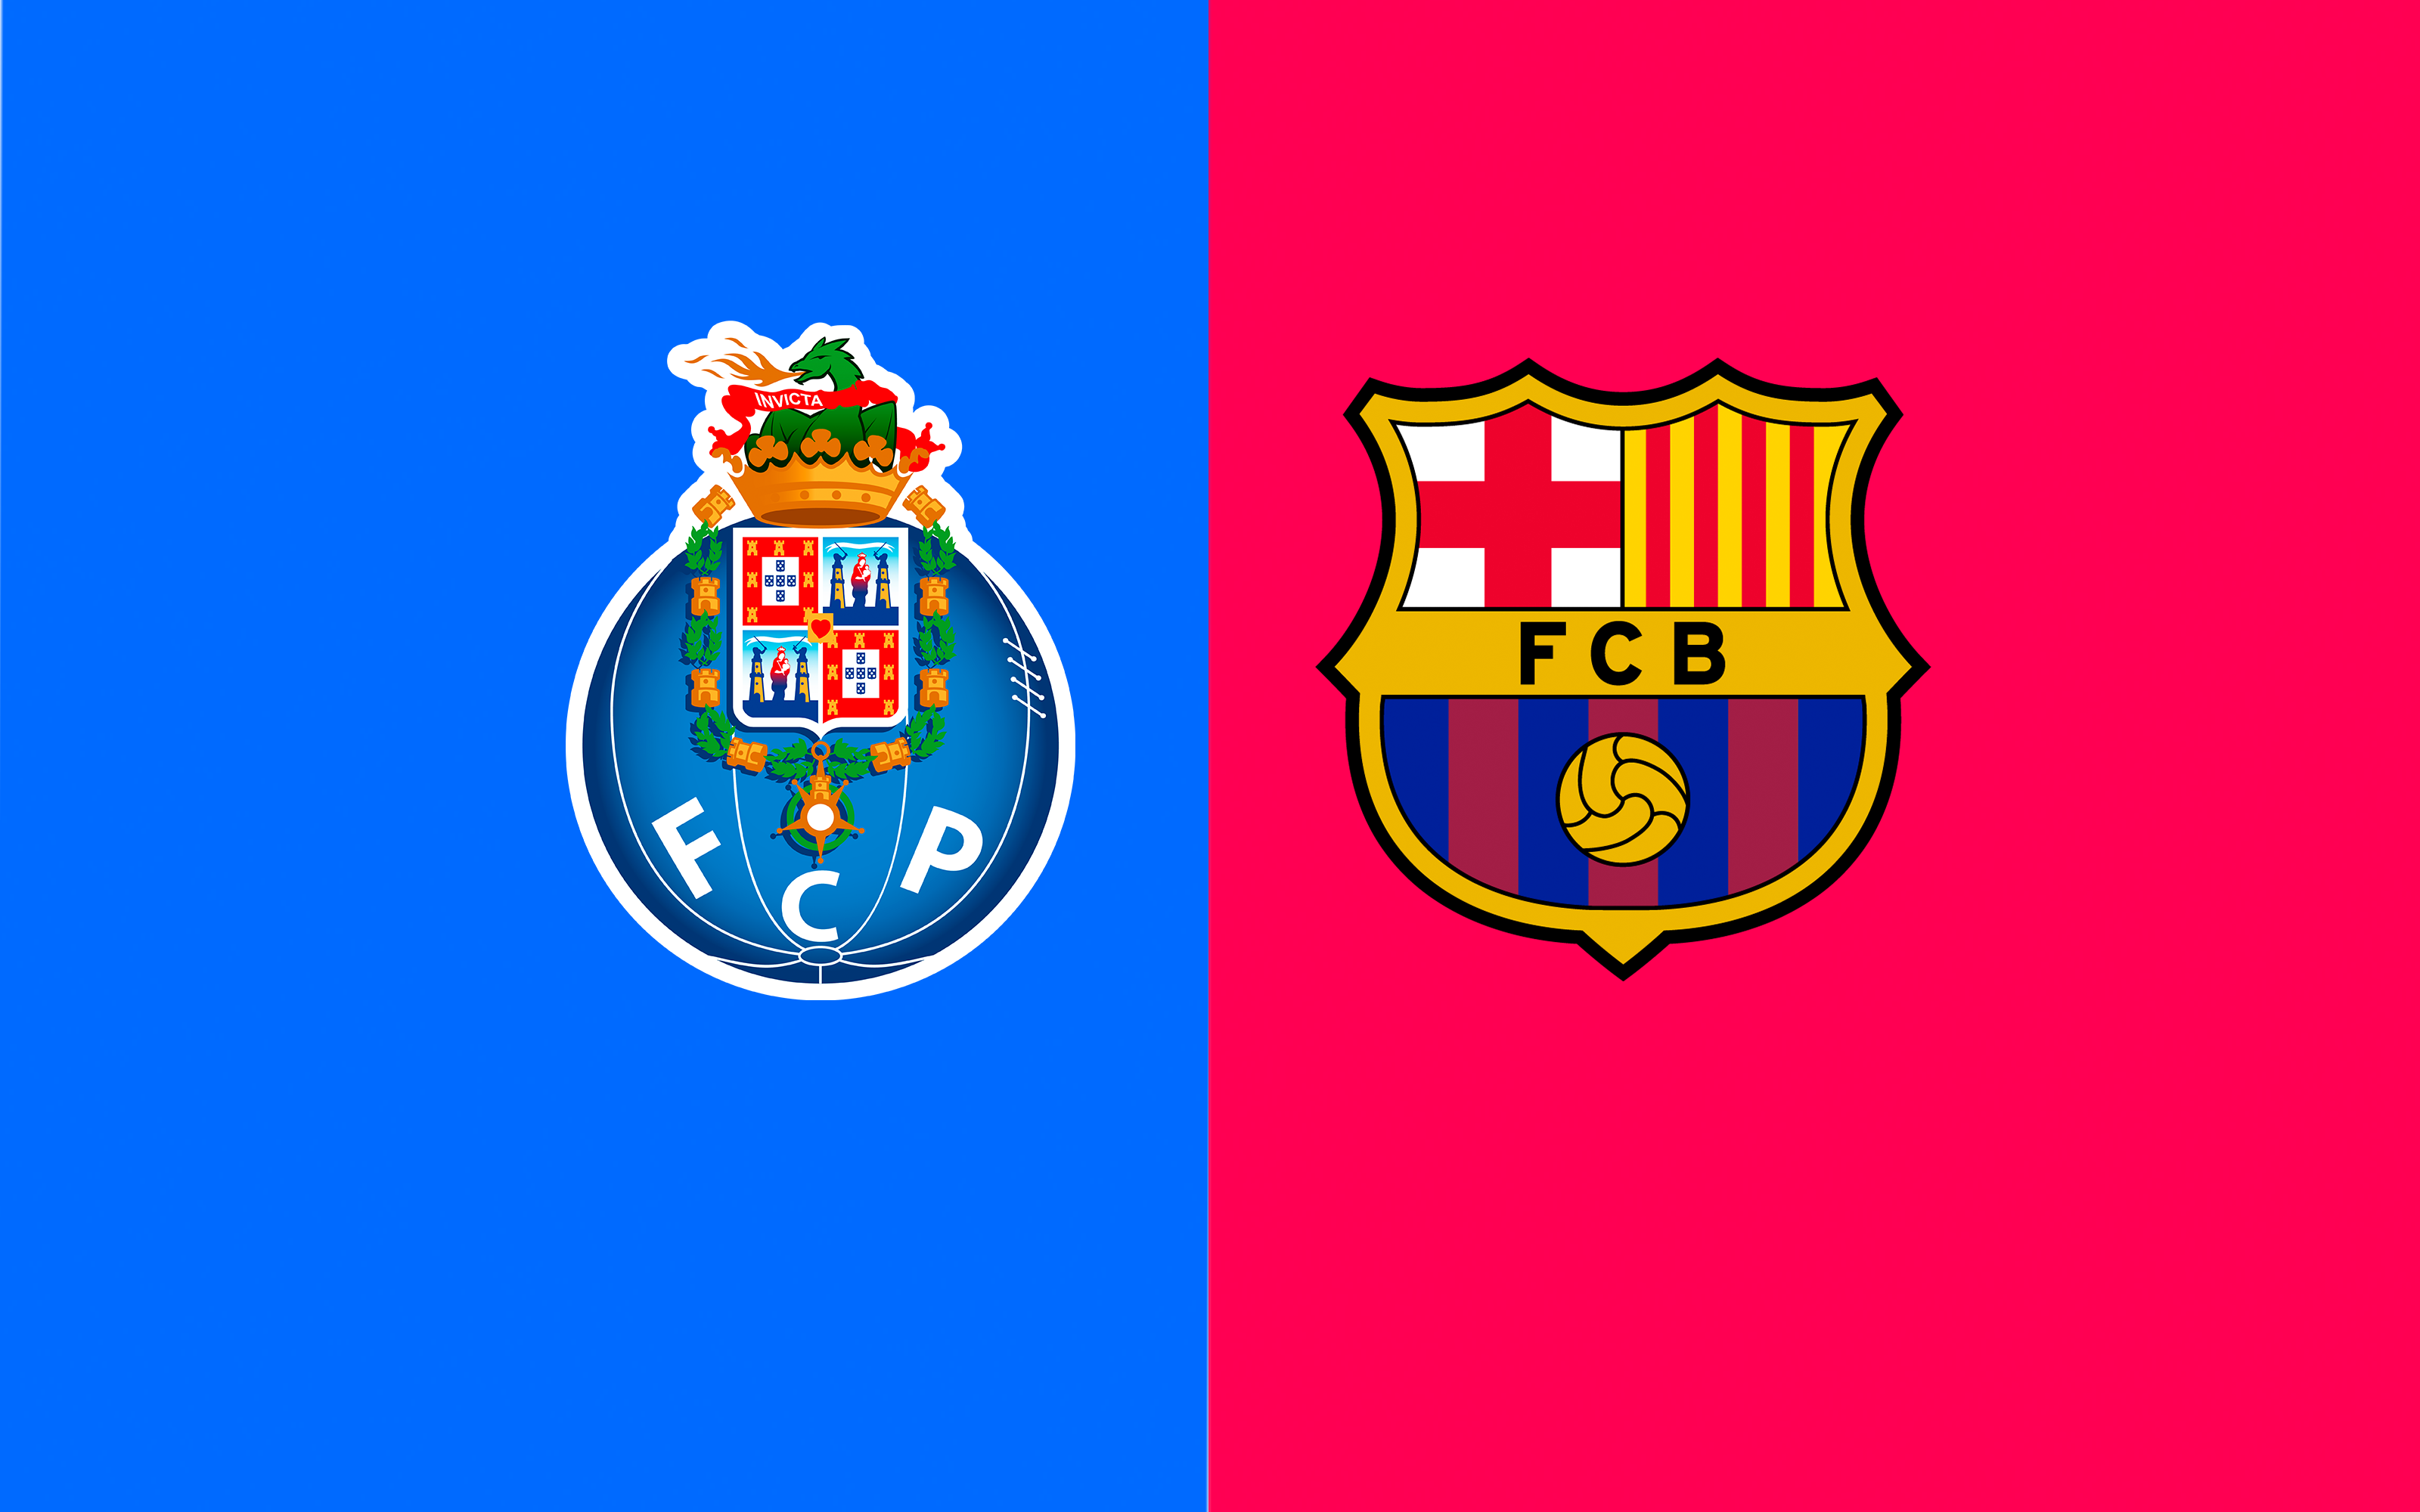 When and where to watch FC Porto v FC Barcelona